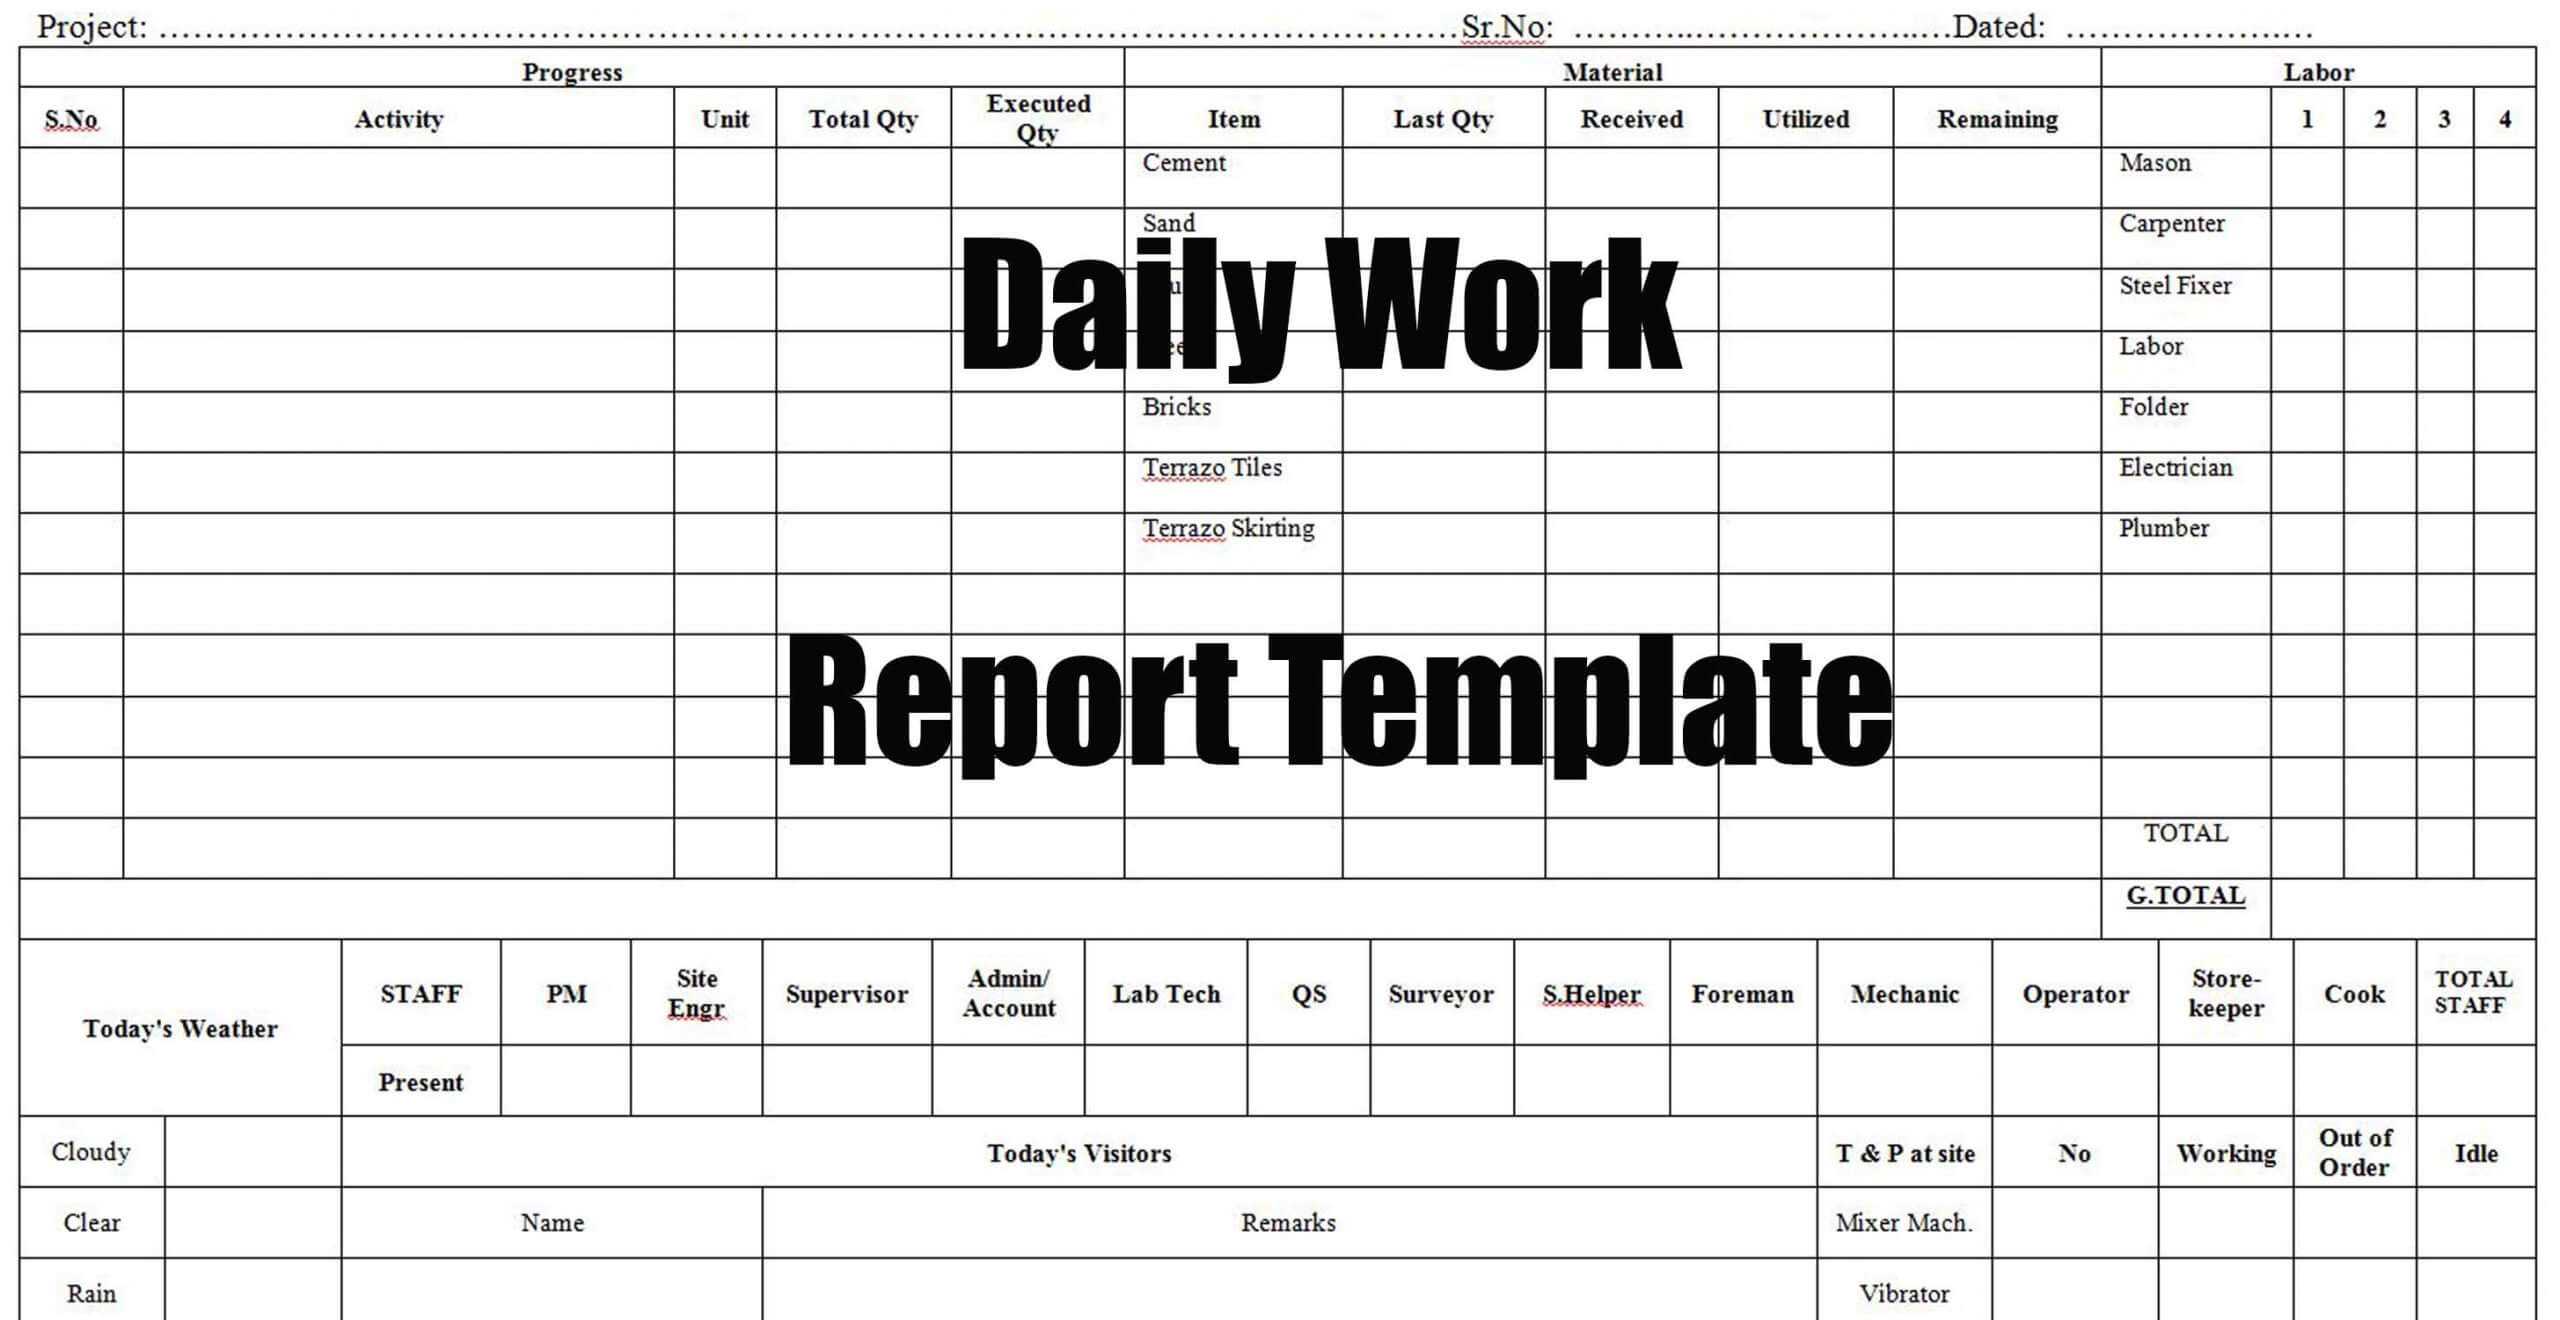 Daily Work Report Template - Engineering Discoveries With Daily Work Report Template